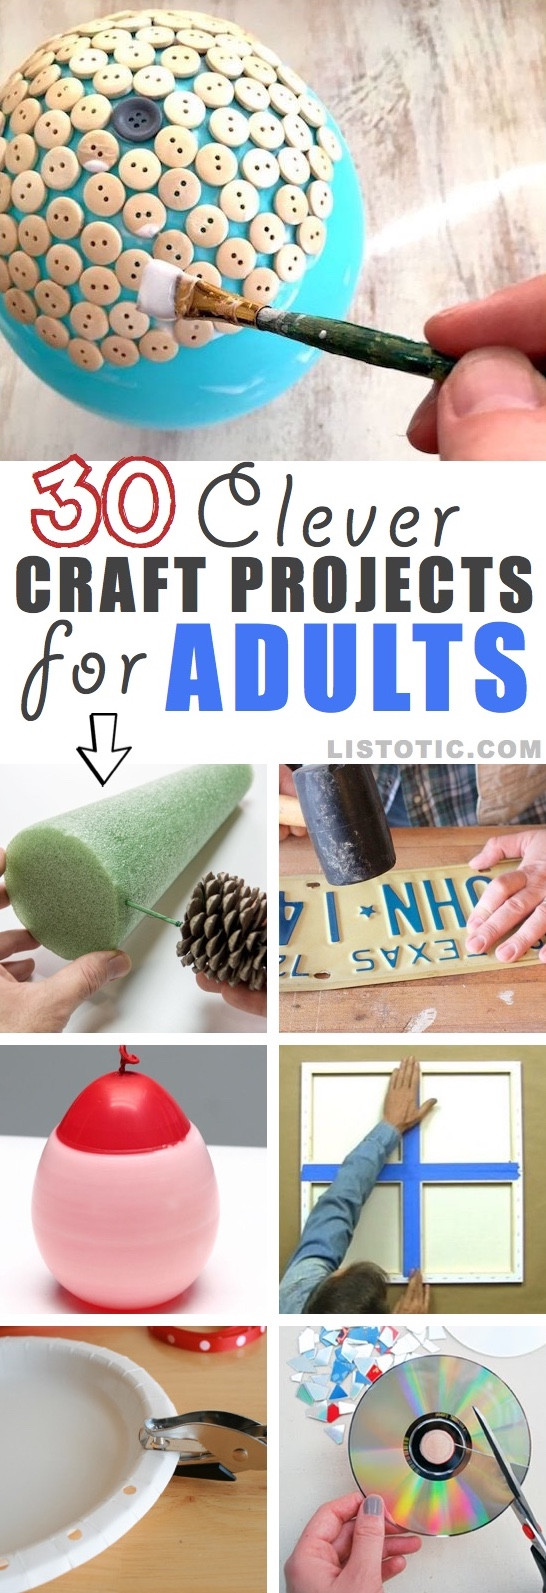 DIY Activities For Adults
 10 Creative Craft Ideas For Adults Abundator